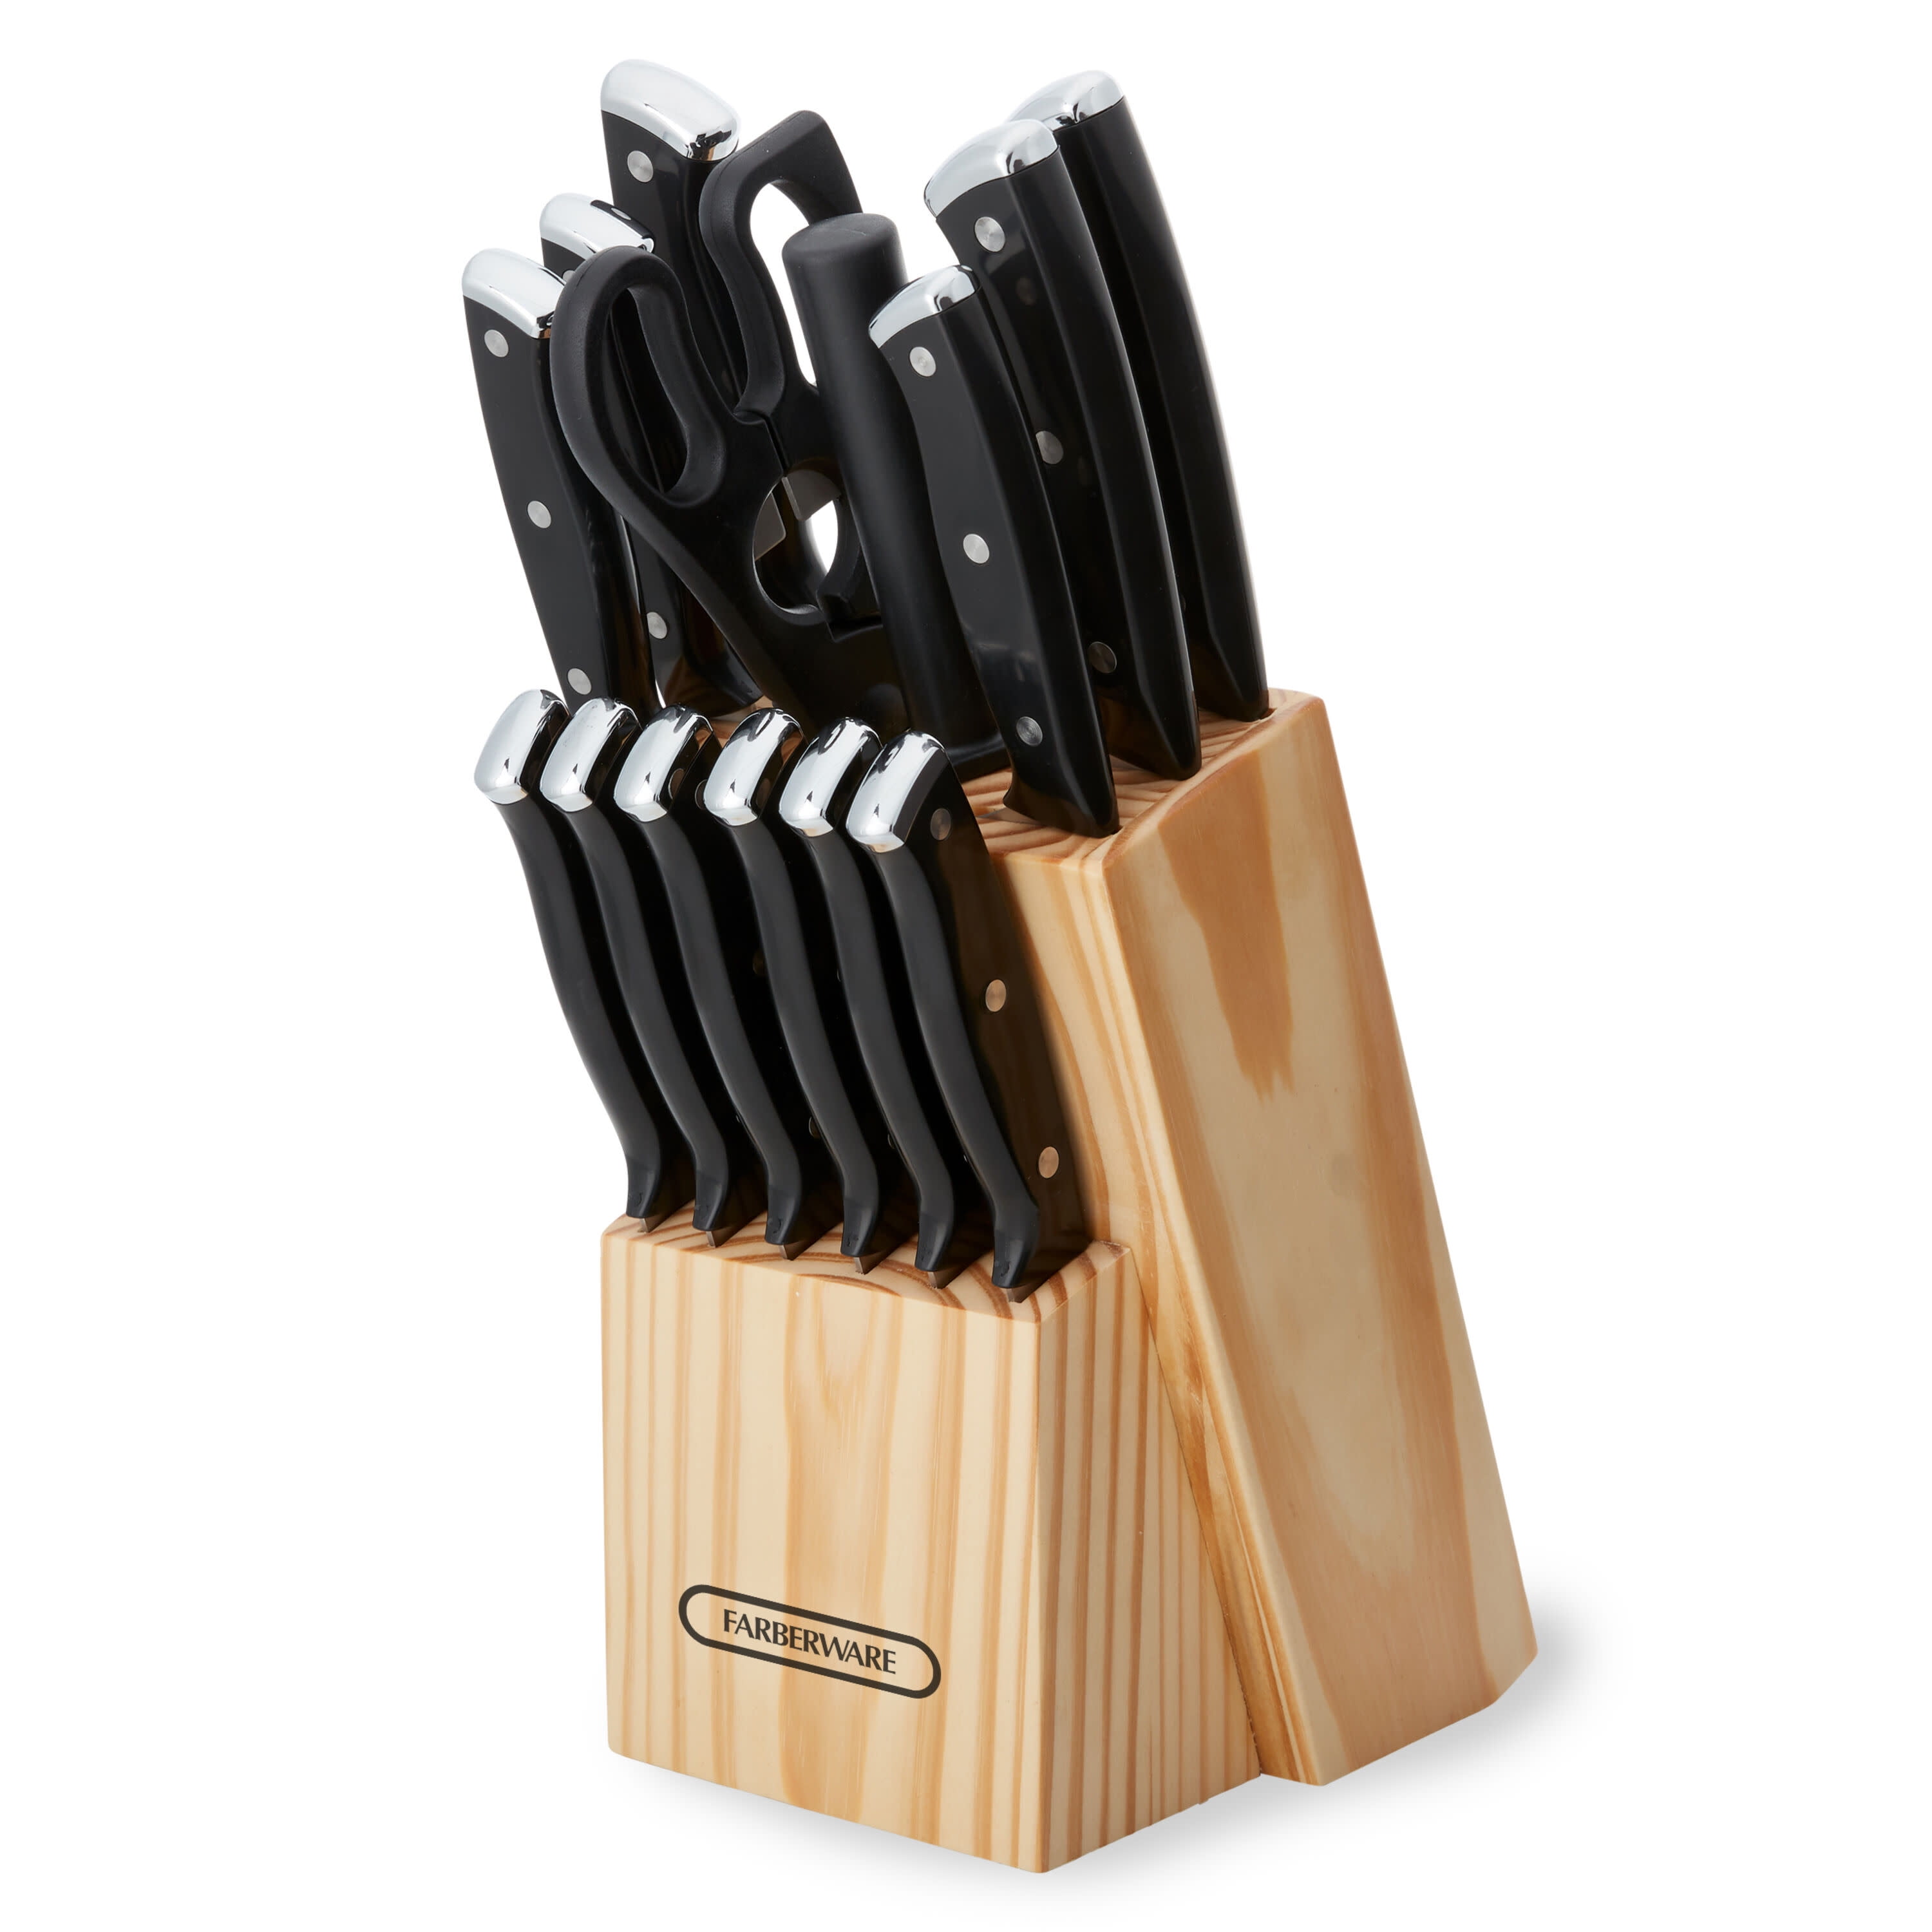 Farberware 15pc Cutlery Forged Triple Rivet Knife Block Set with